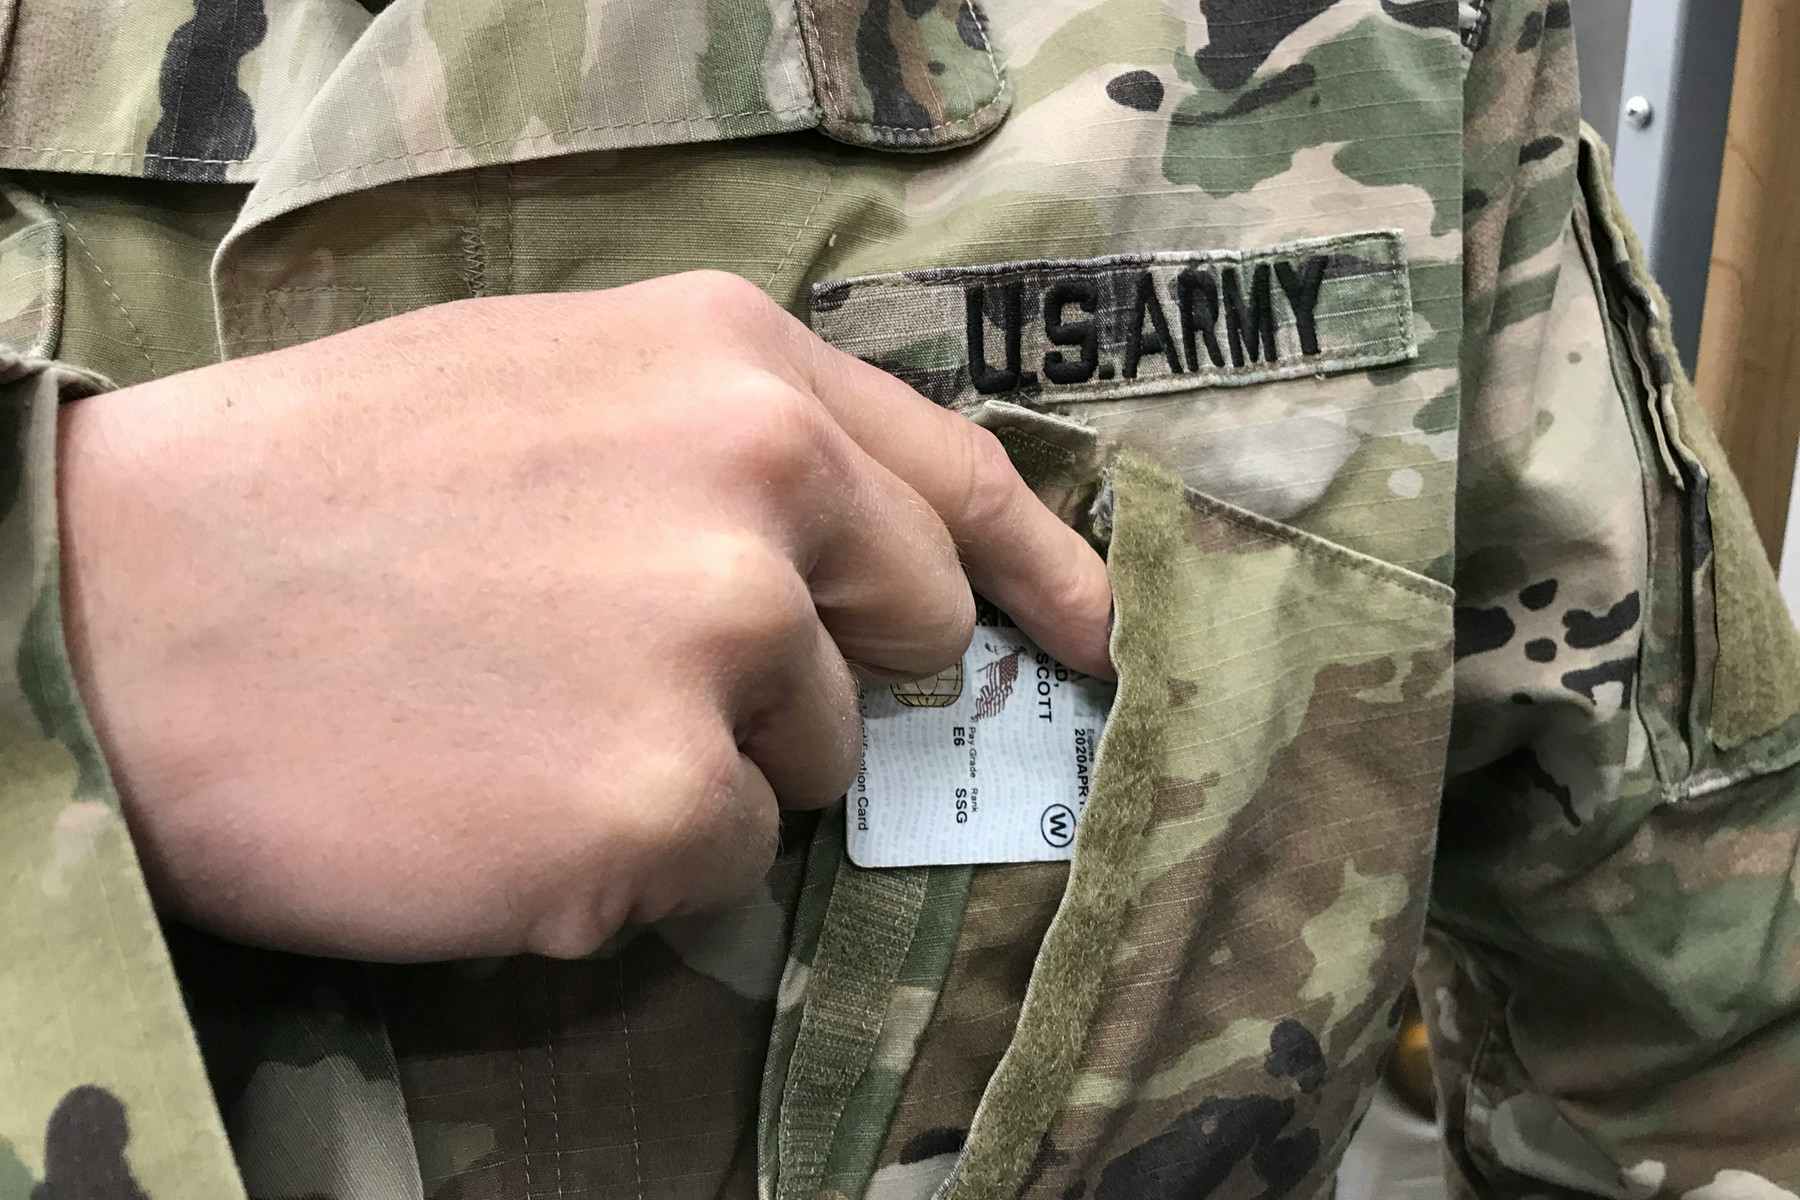 A person in US Army fatigues pulling a military ID from their front shirt pocket.